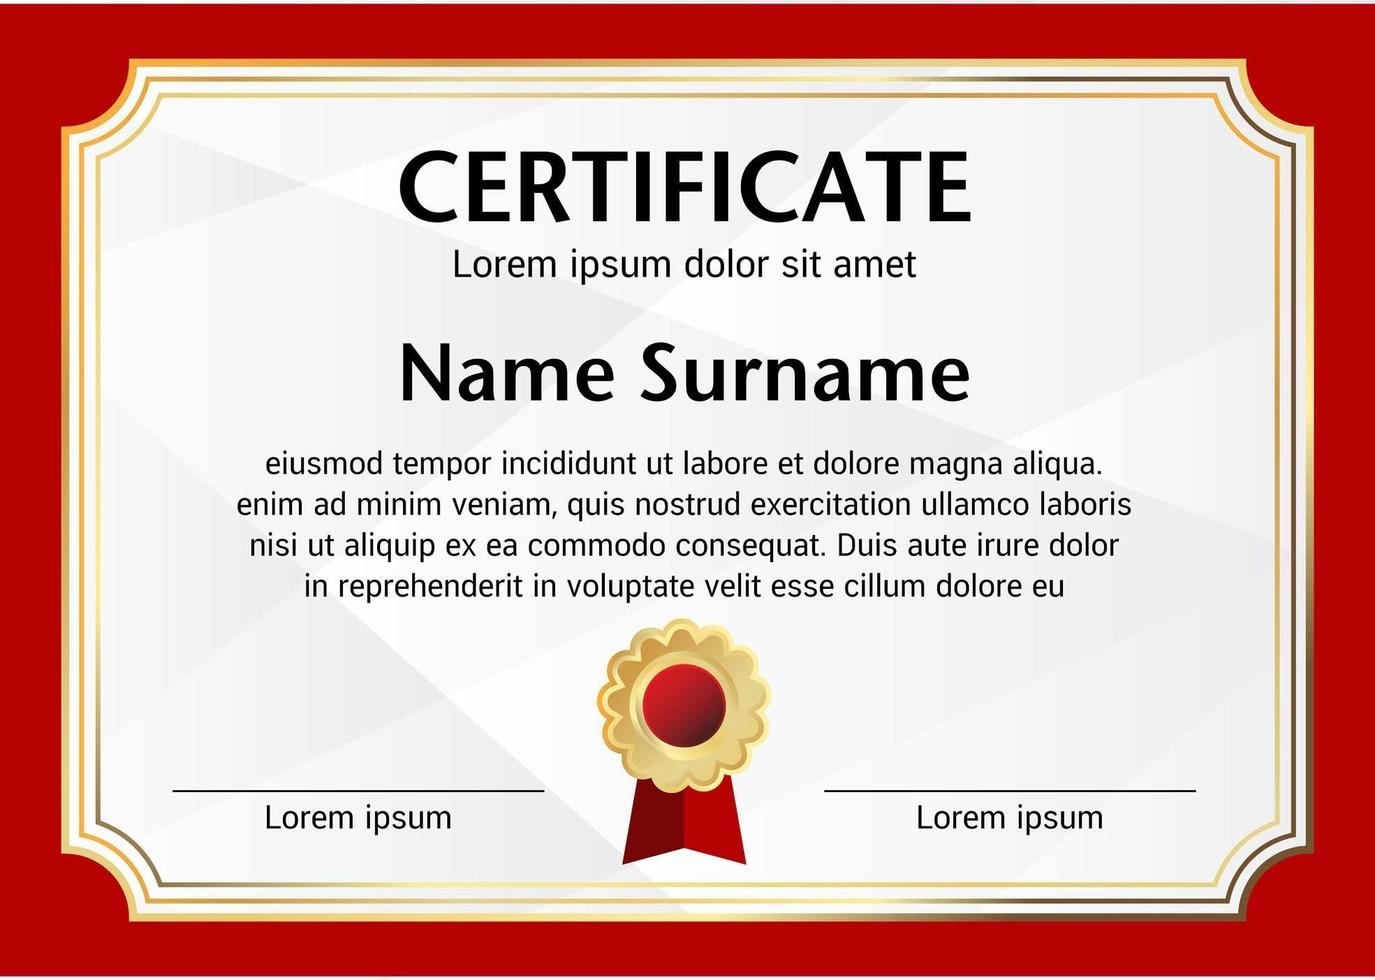 Red Border Certificate Template 1222721 Vector Art At Vecteezy With Award Certificate Border Template